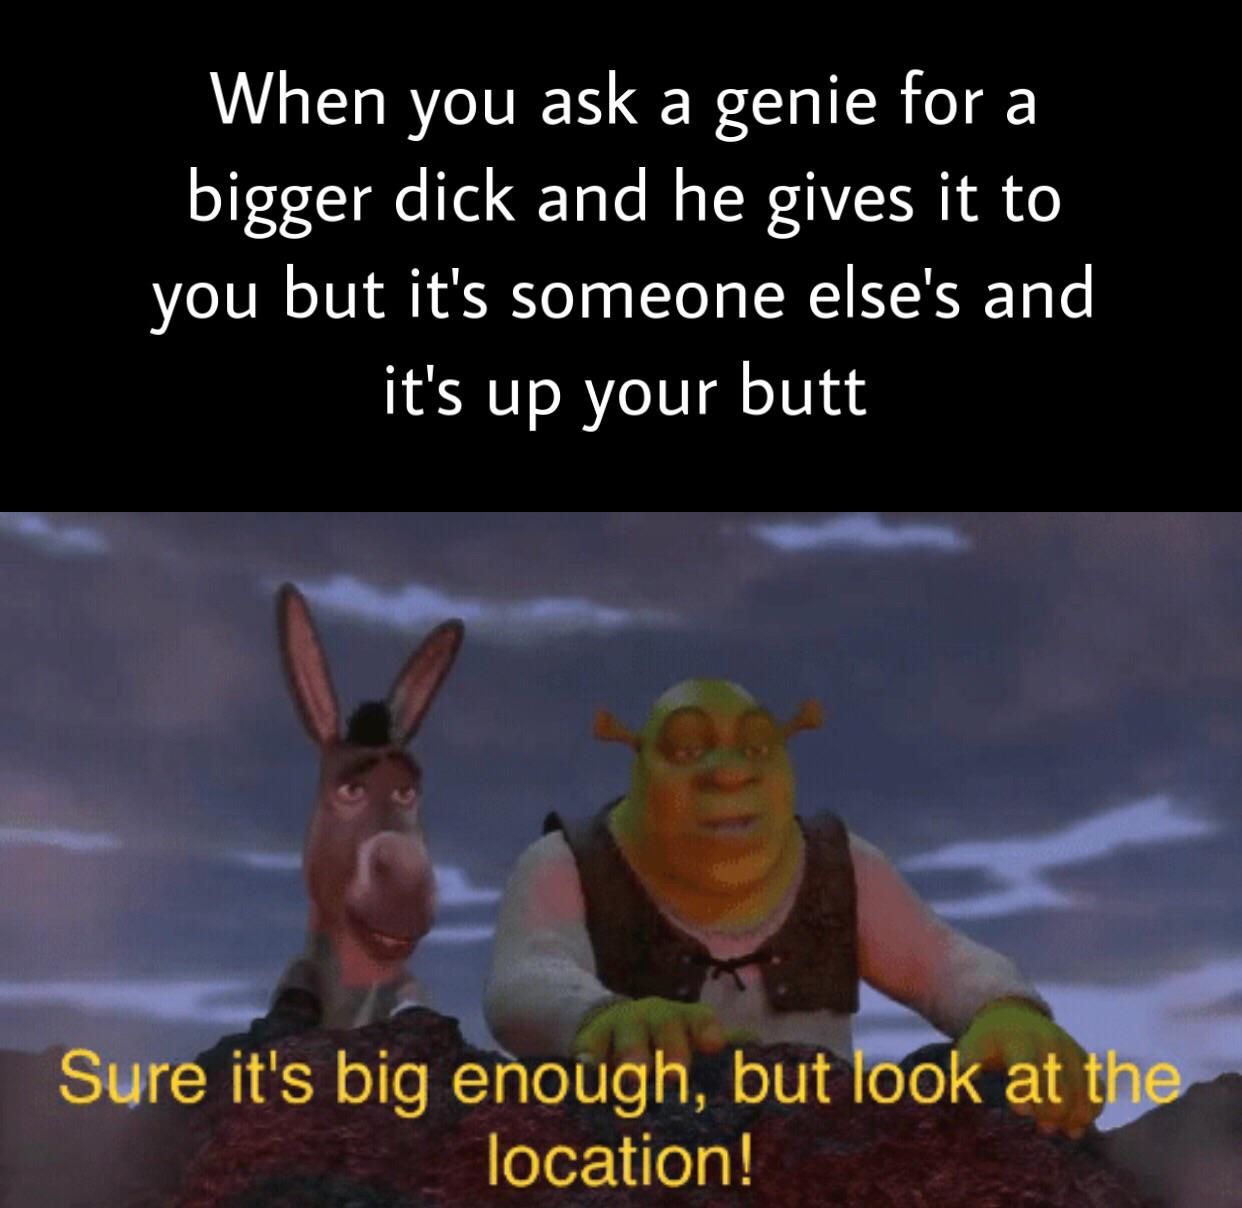 Dank Meme dank-memes cute text: When you ask a genie for a bigger dick and he gives it to you but it's someone else's and it's up your butt Sure it's big enough, but 106k ath location! 